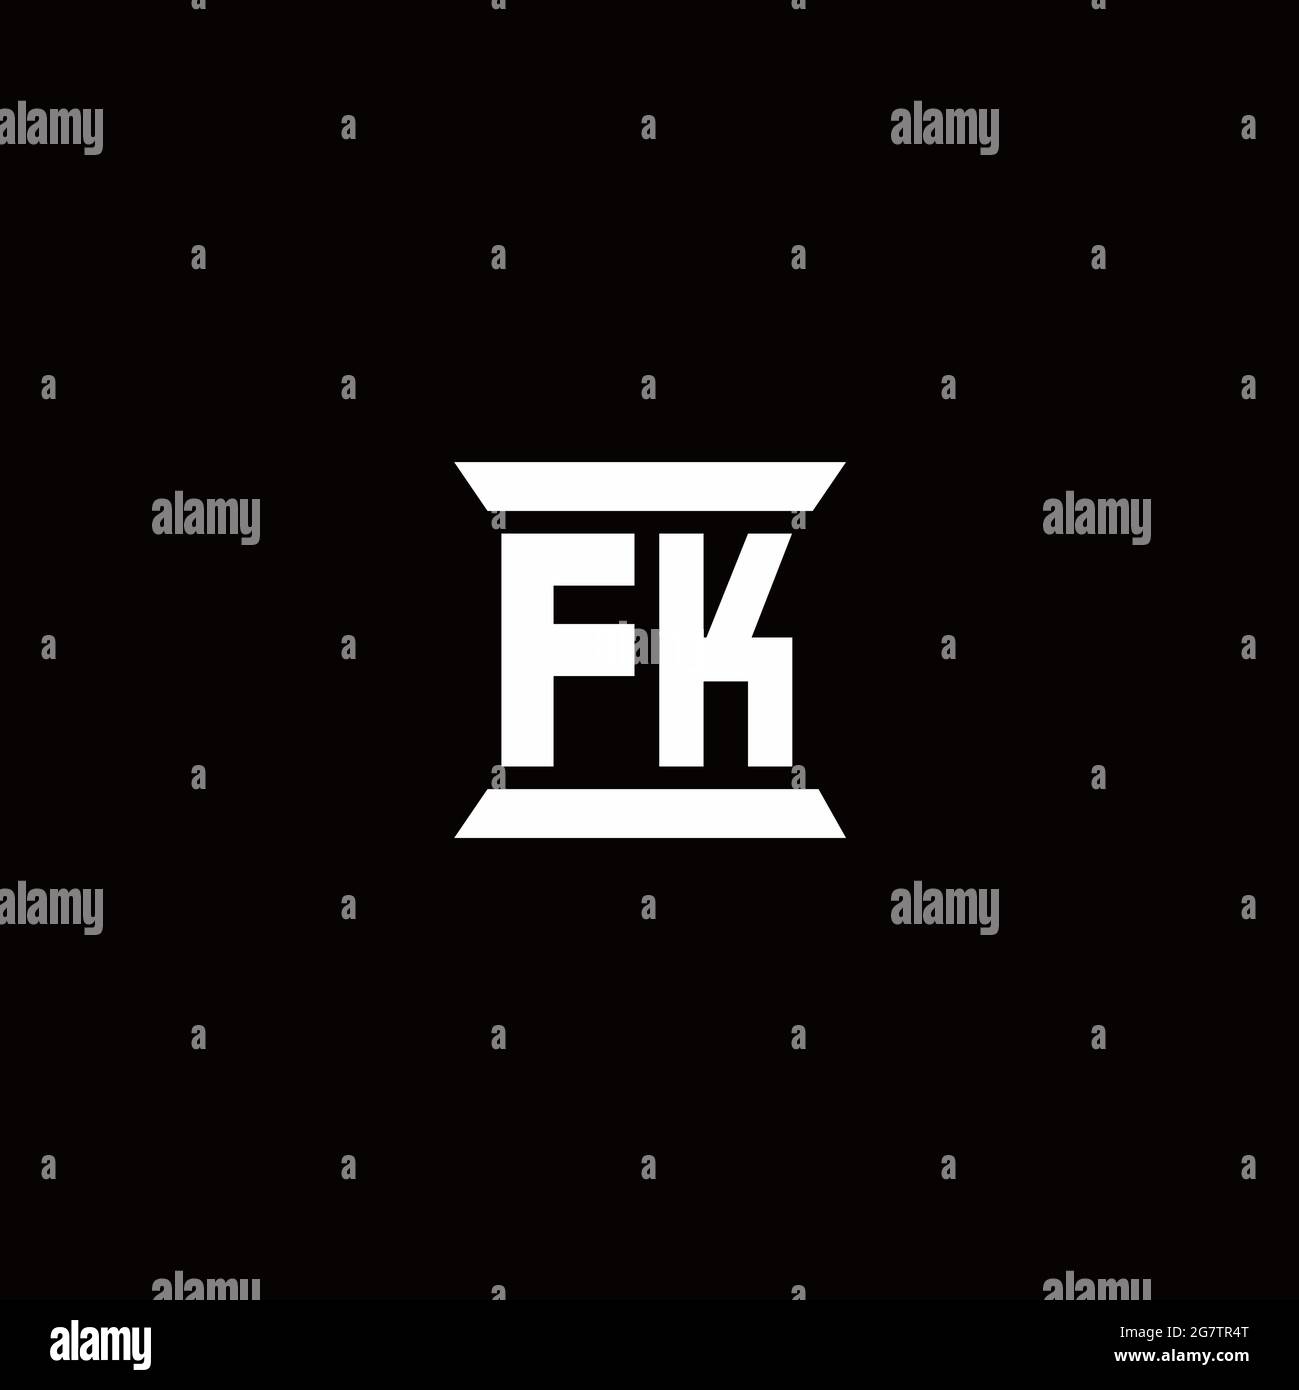 FK logo initial letter monogram with pillar shape design template isolated in black background Stock Vector